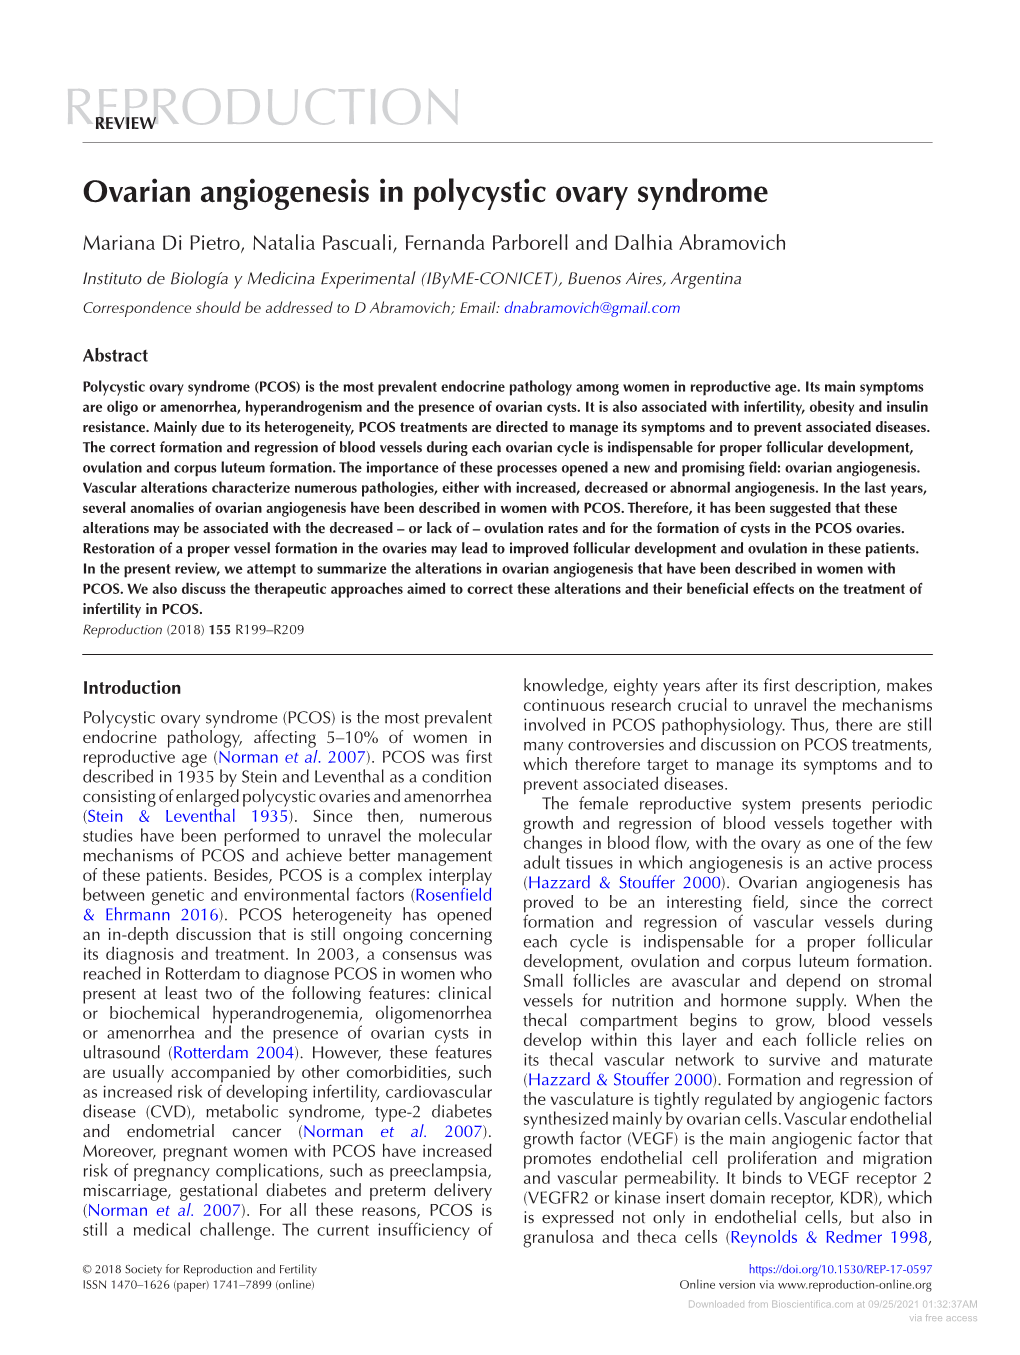 Ovarian Angiogenesis in Polycystic Ovary Syndrome